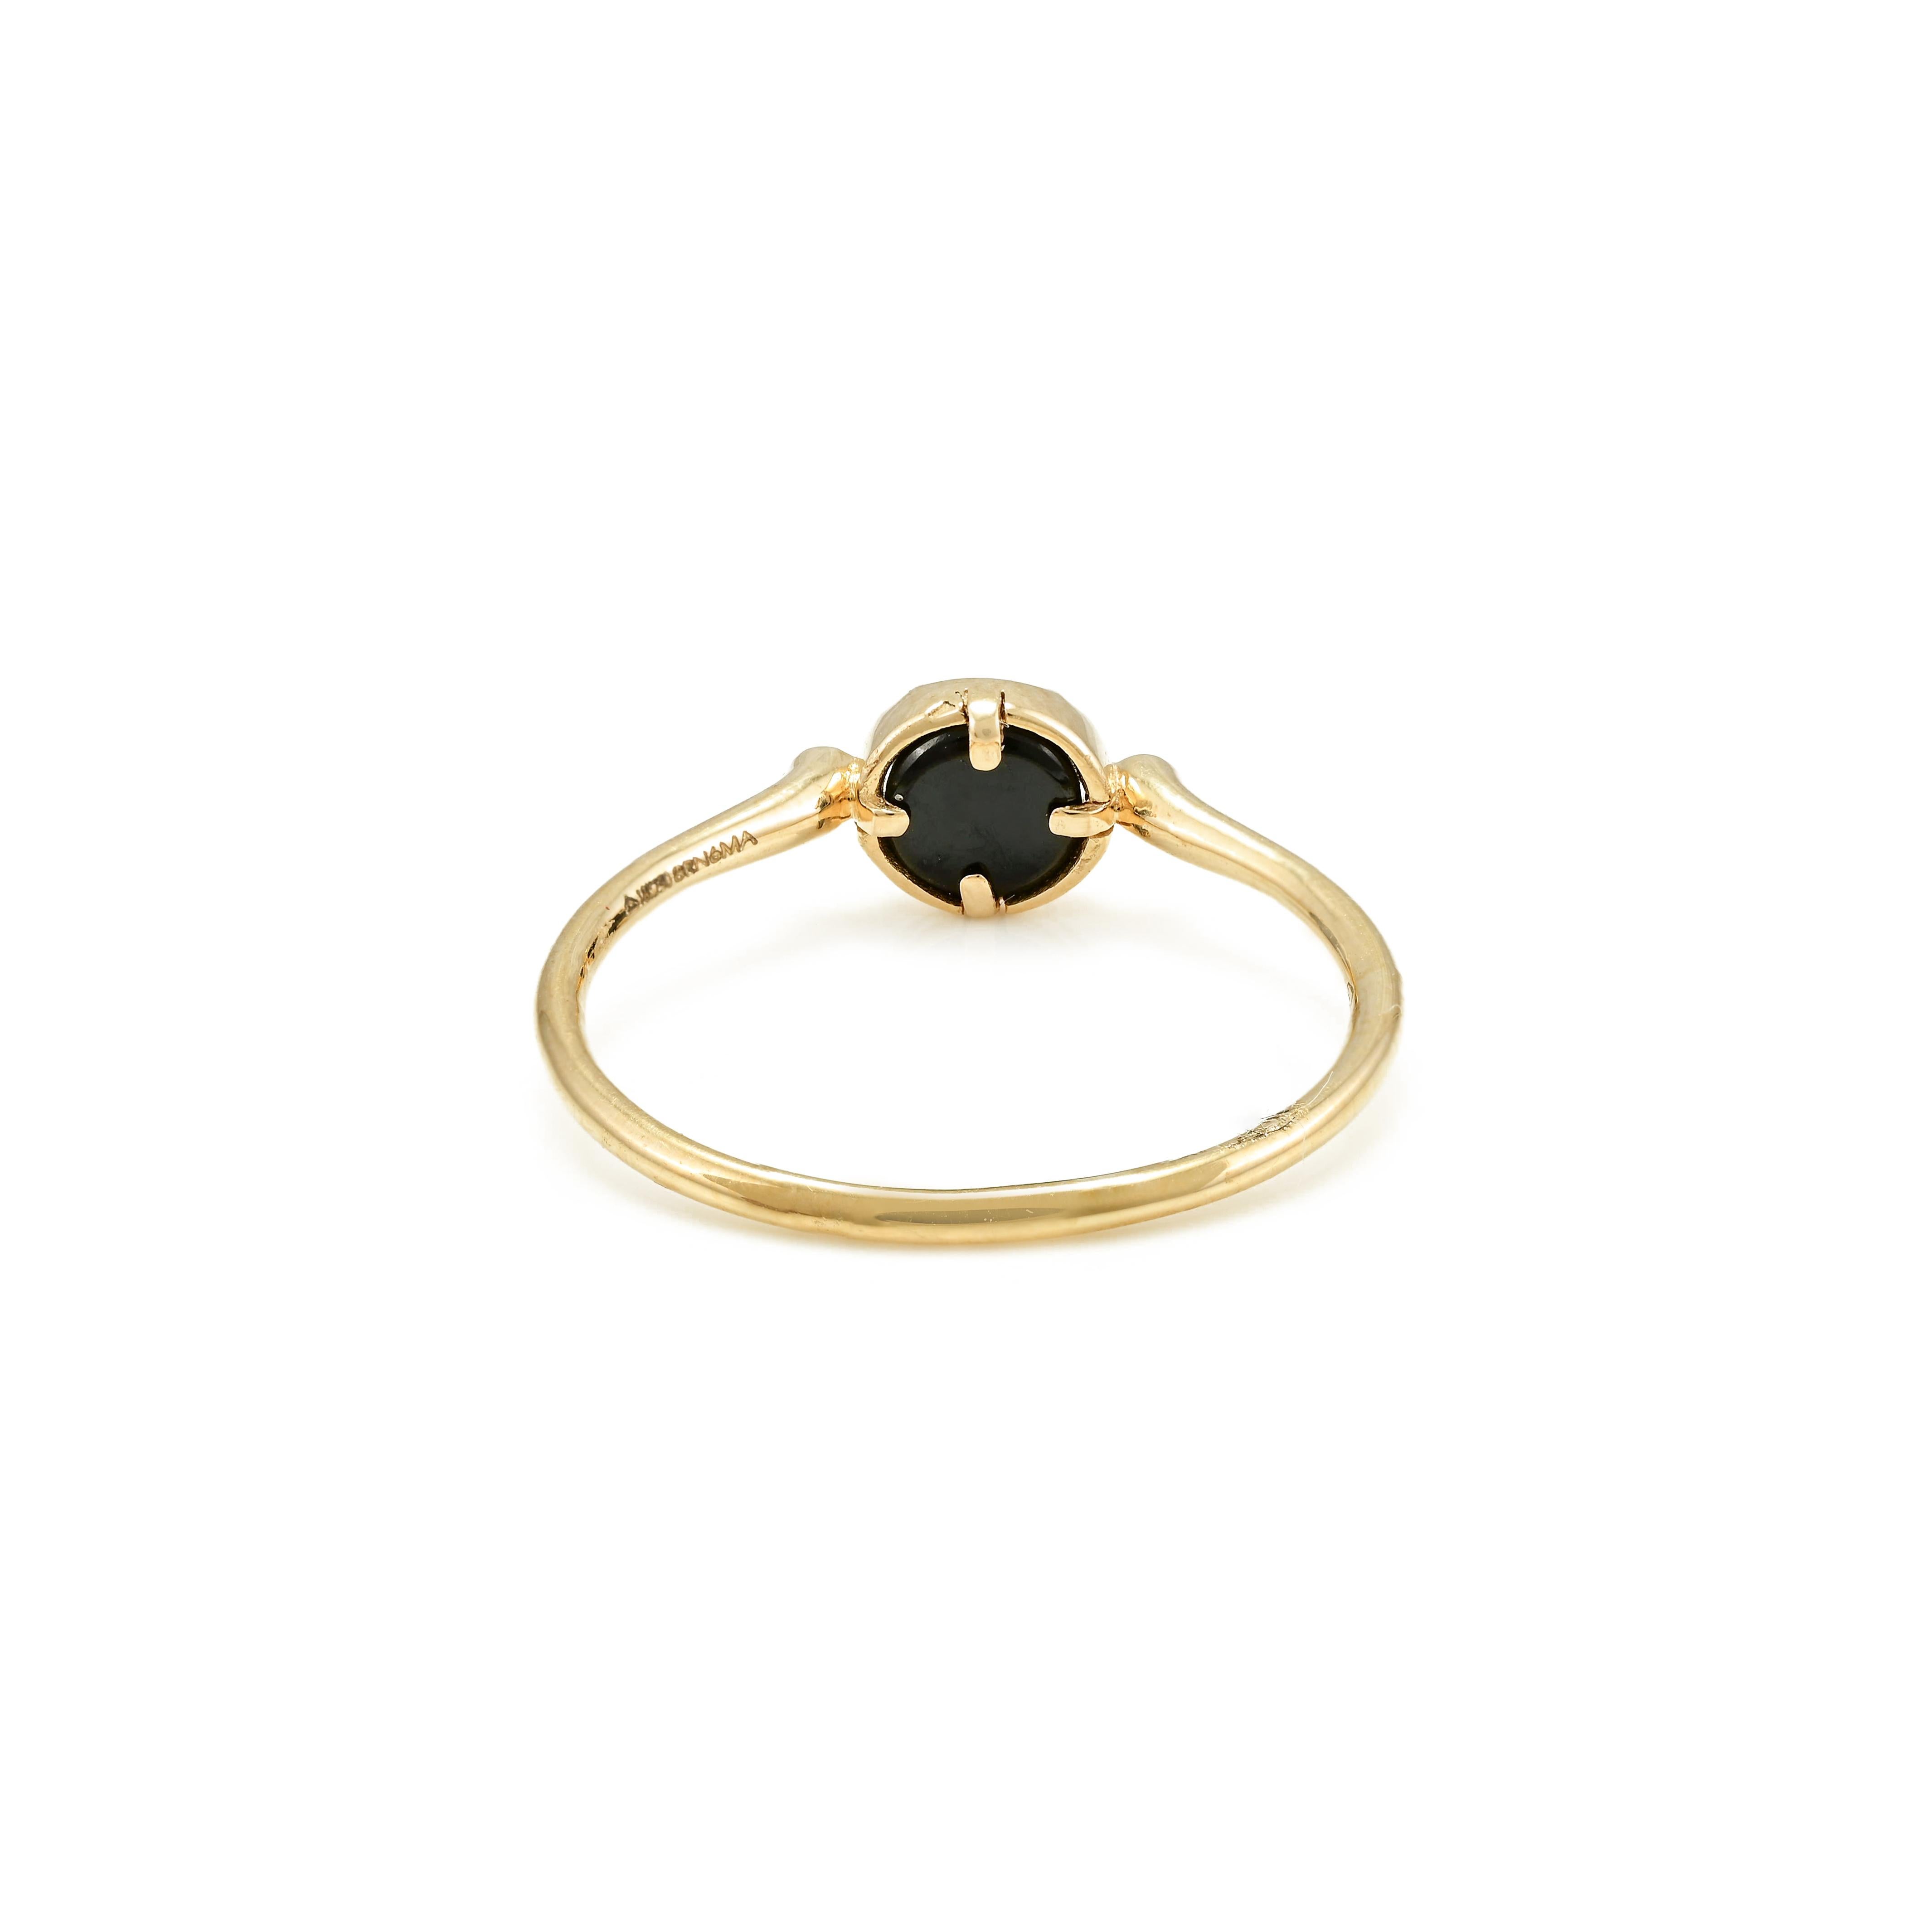 For Sale:  Unique 18k Solid Yellow Gold Dainty Black Onyx Gemstone Everyday Ring For Her 7